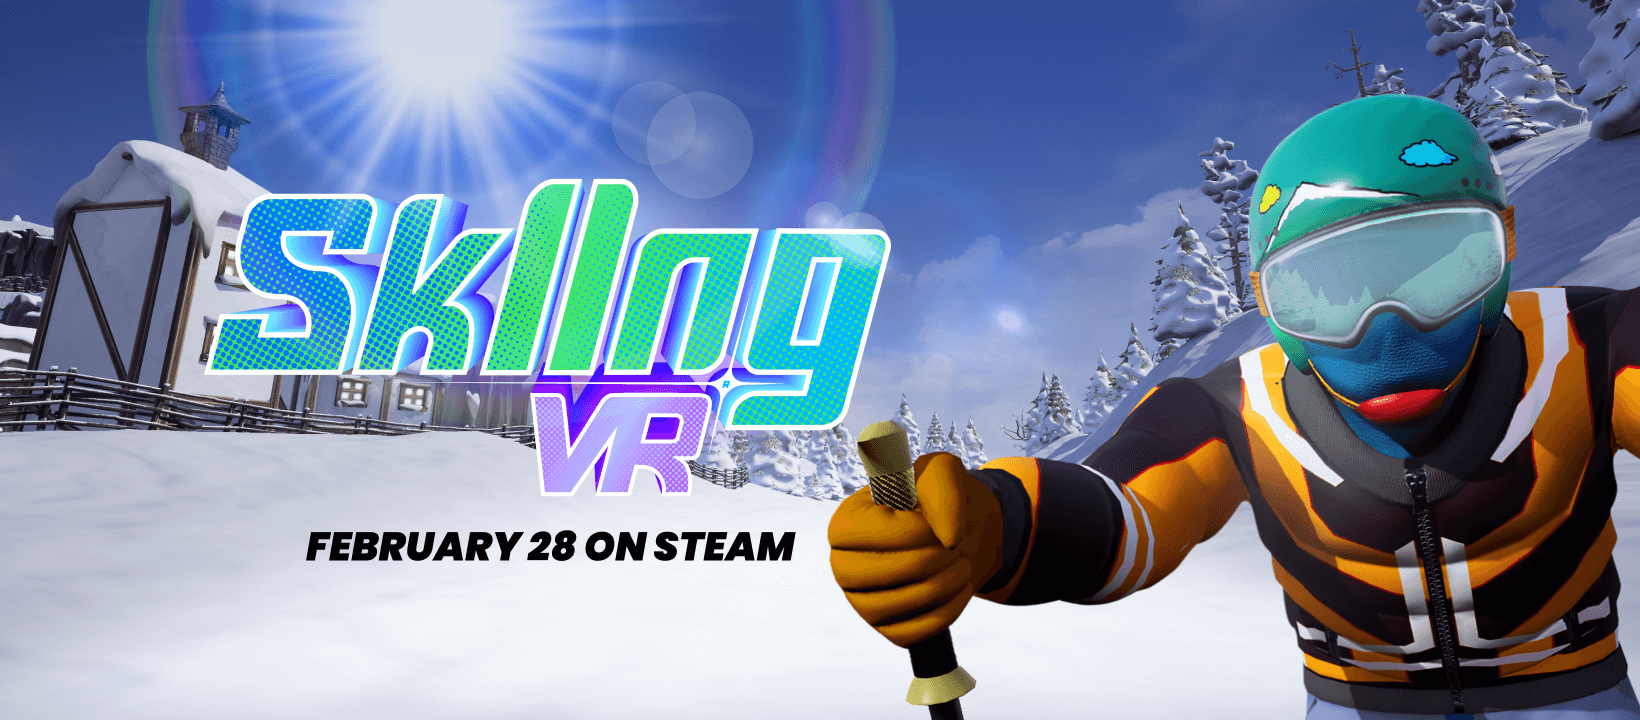 Skiing VR will be avaliable on Feb 28